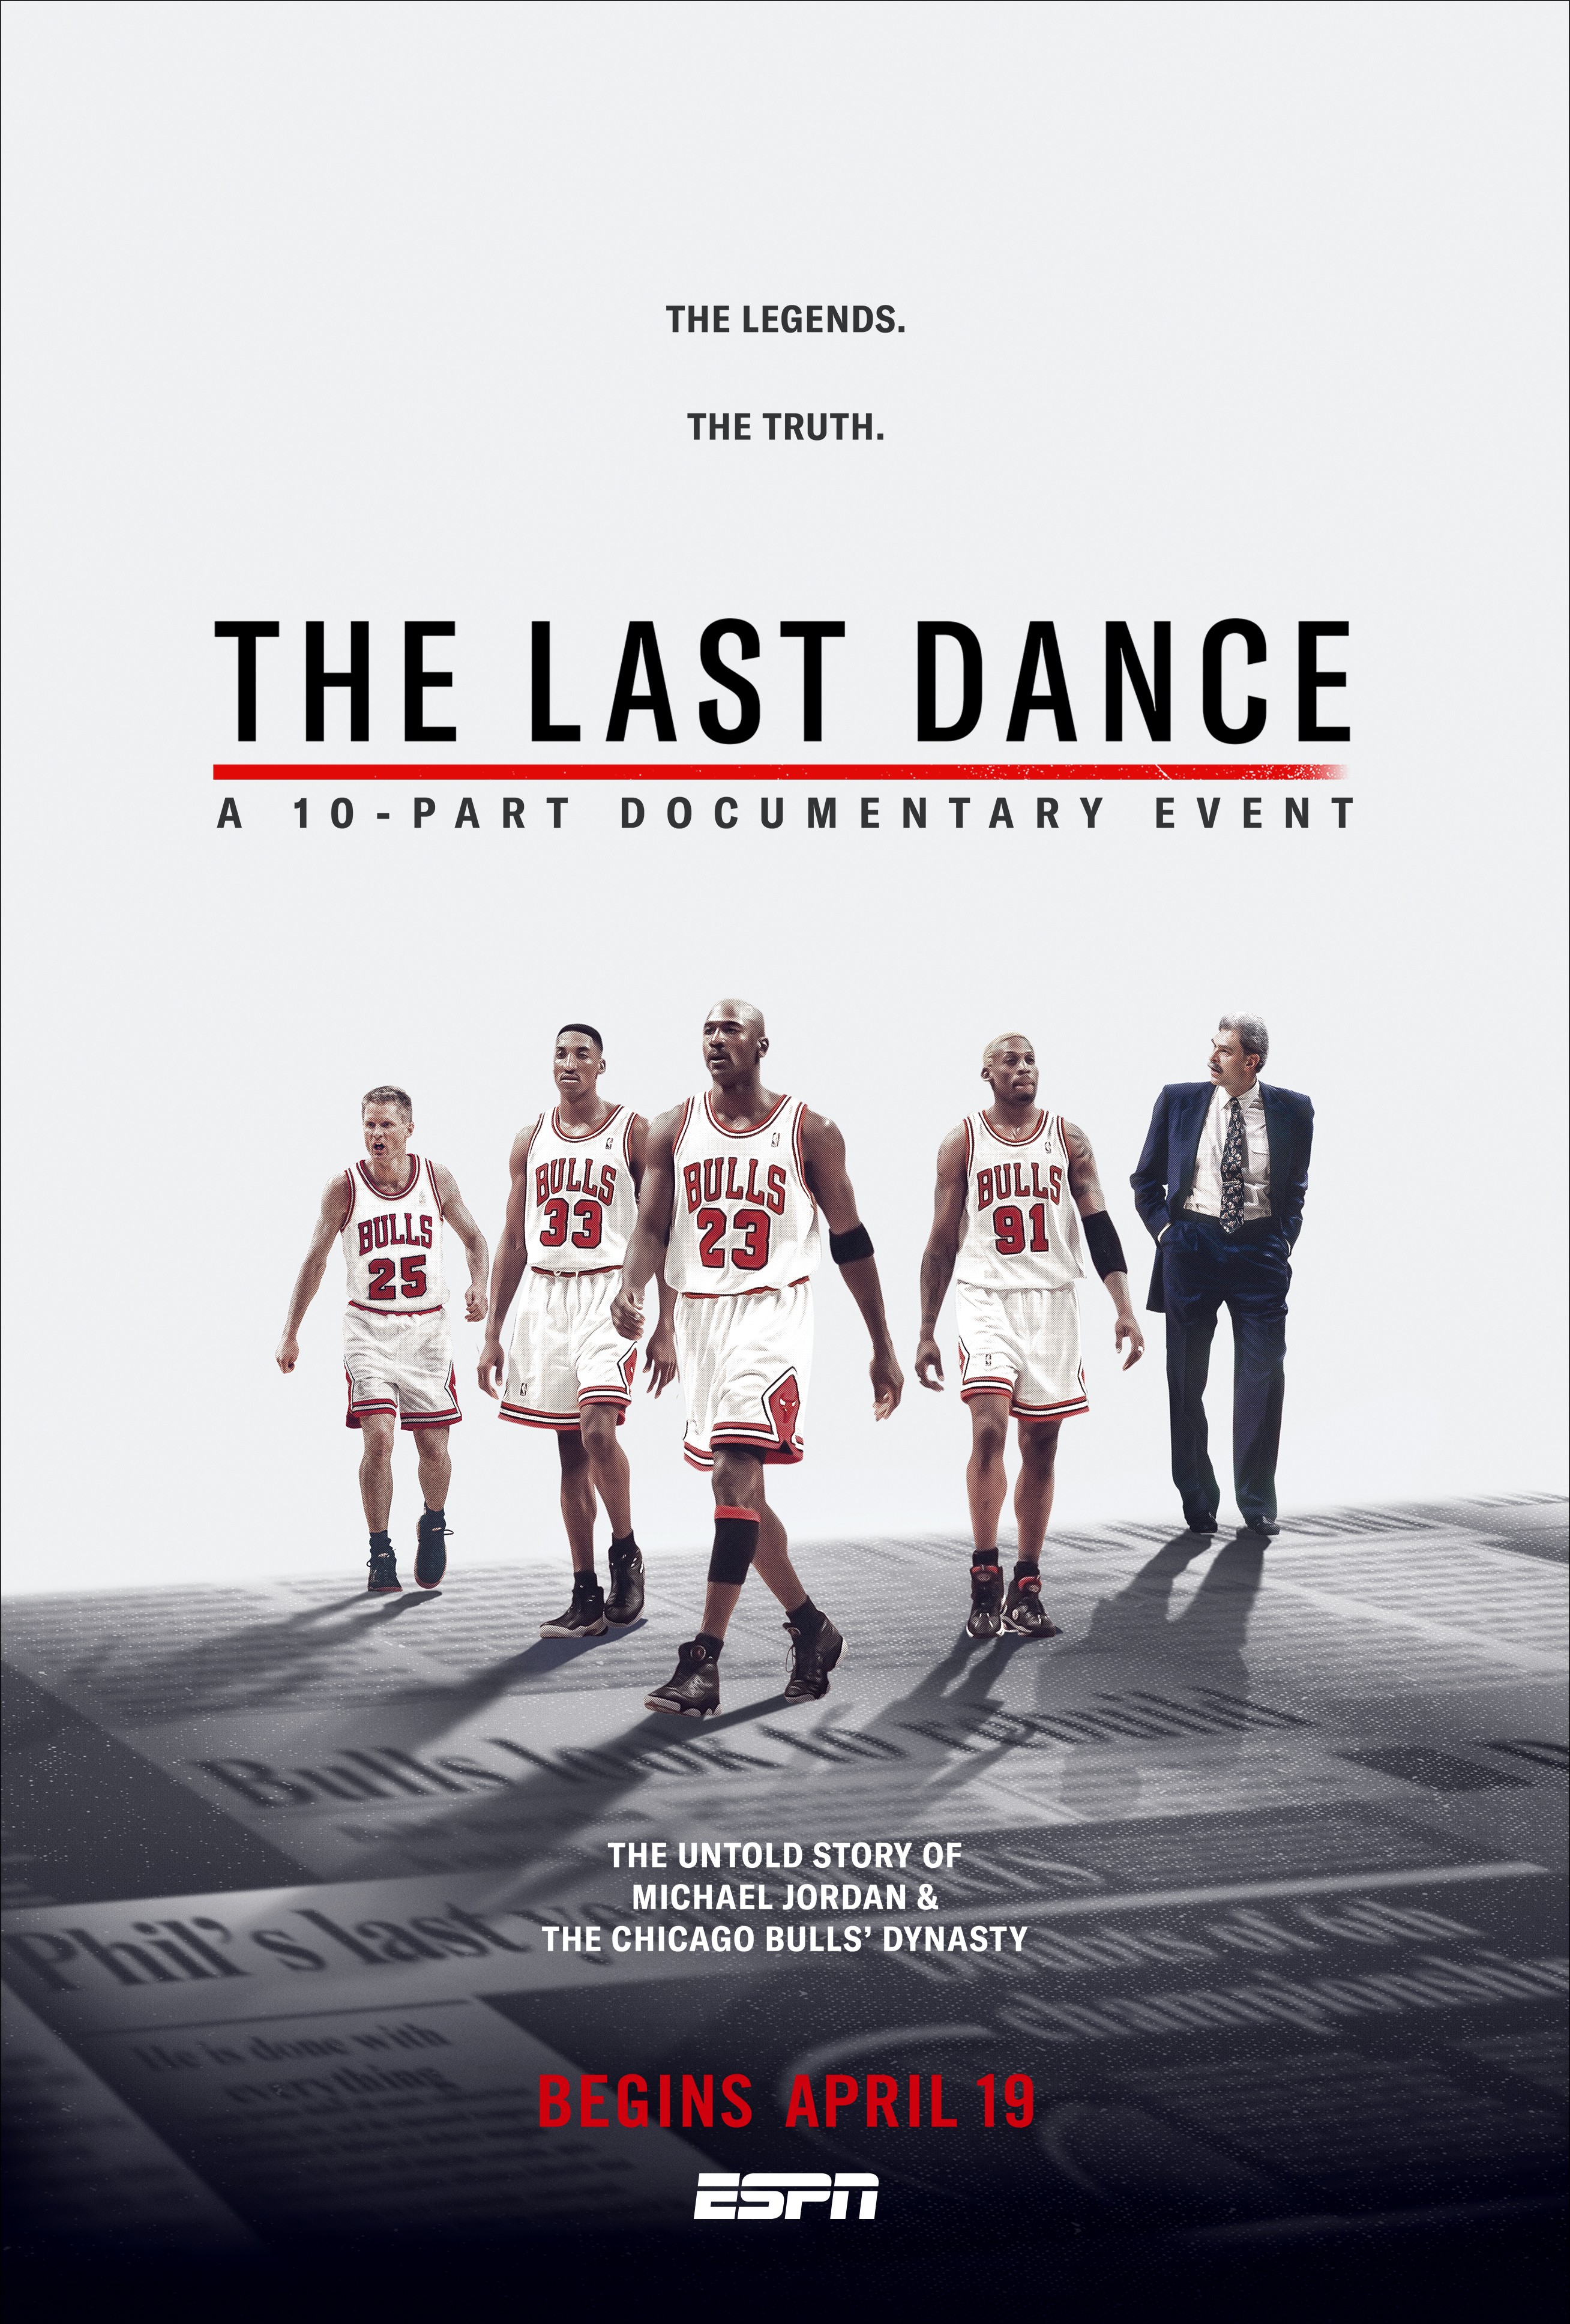 The story of Michael Jordan's security guard from 'The Last Dance' 